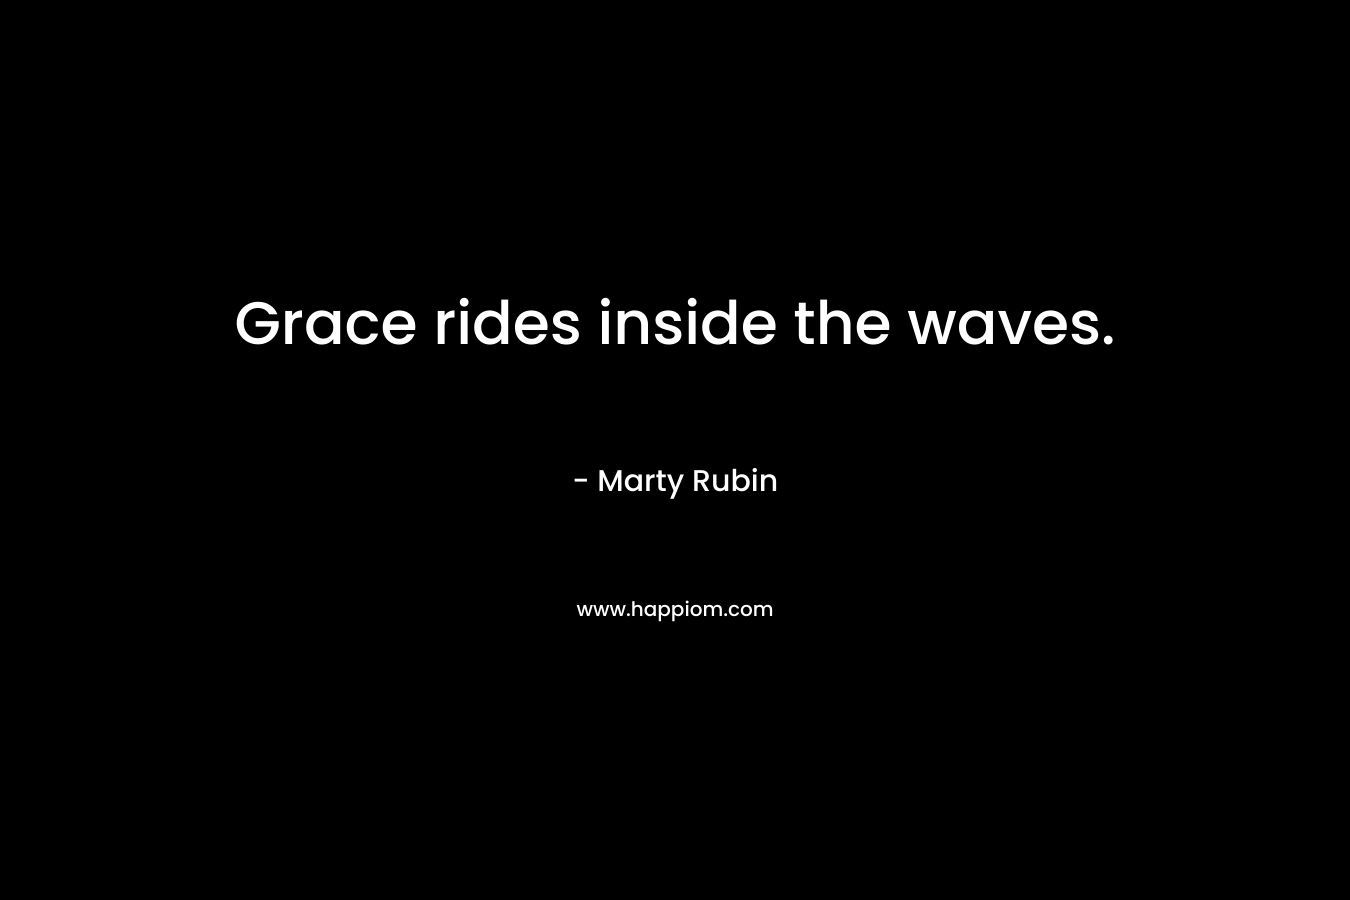 Grace rides inside the waves.